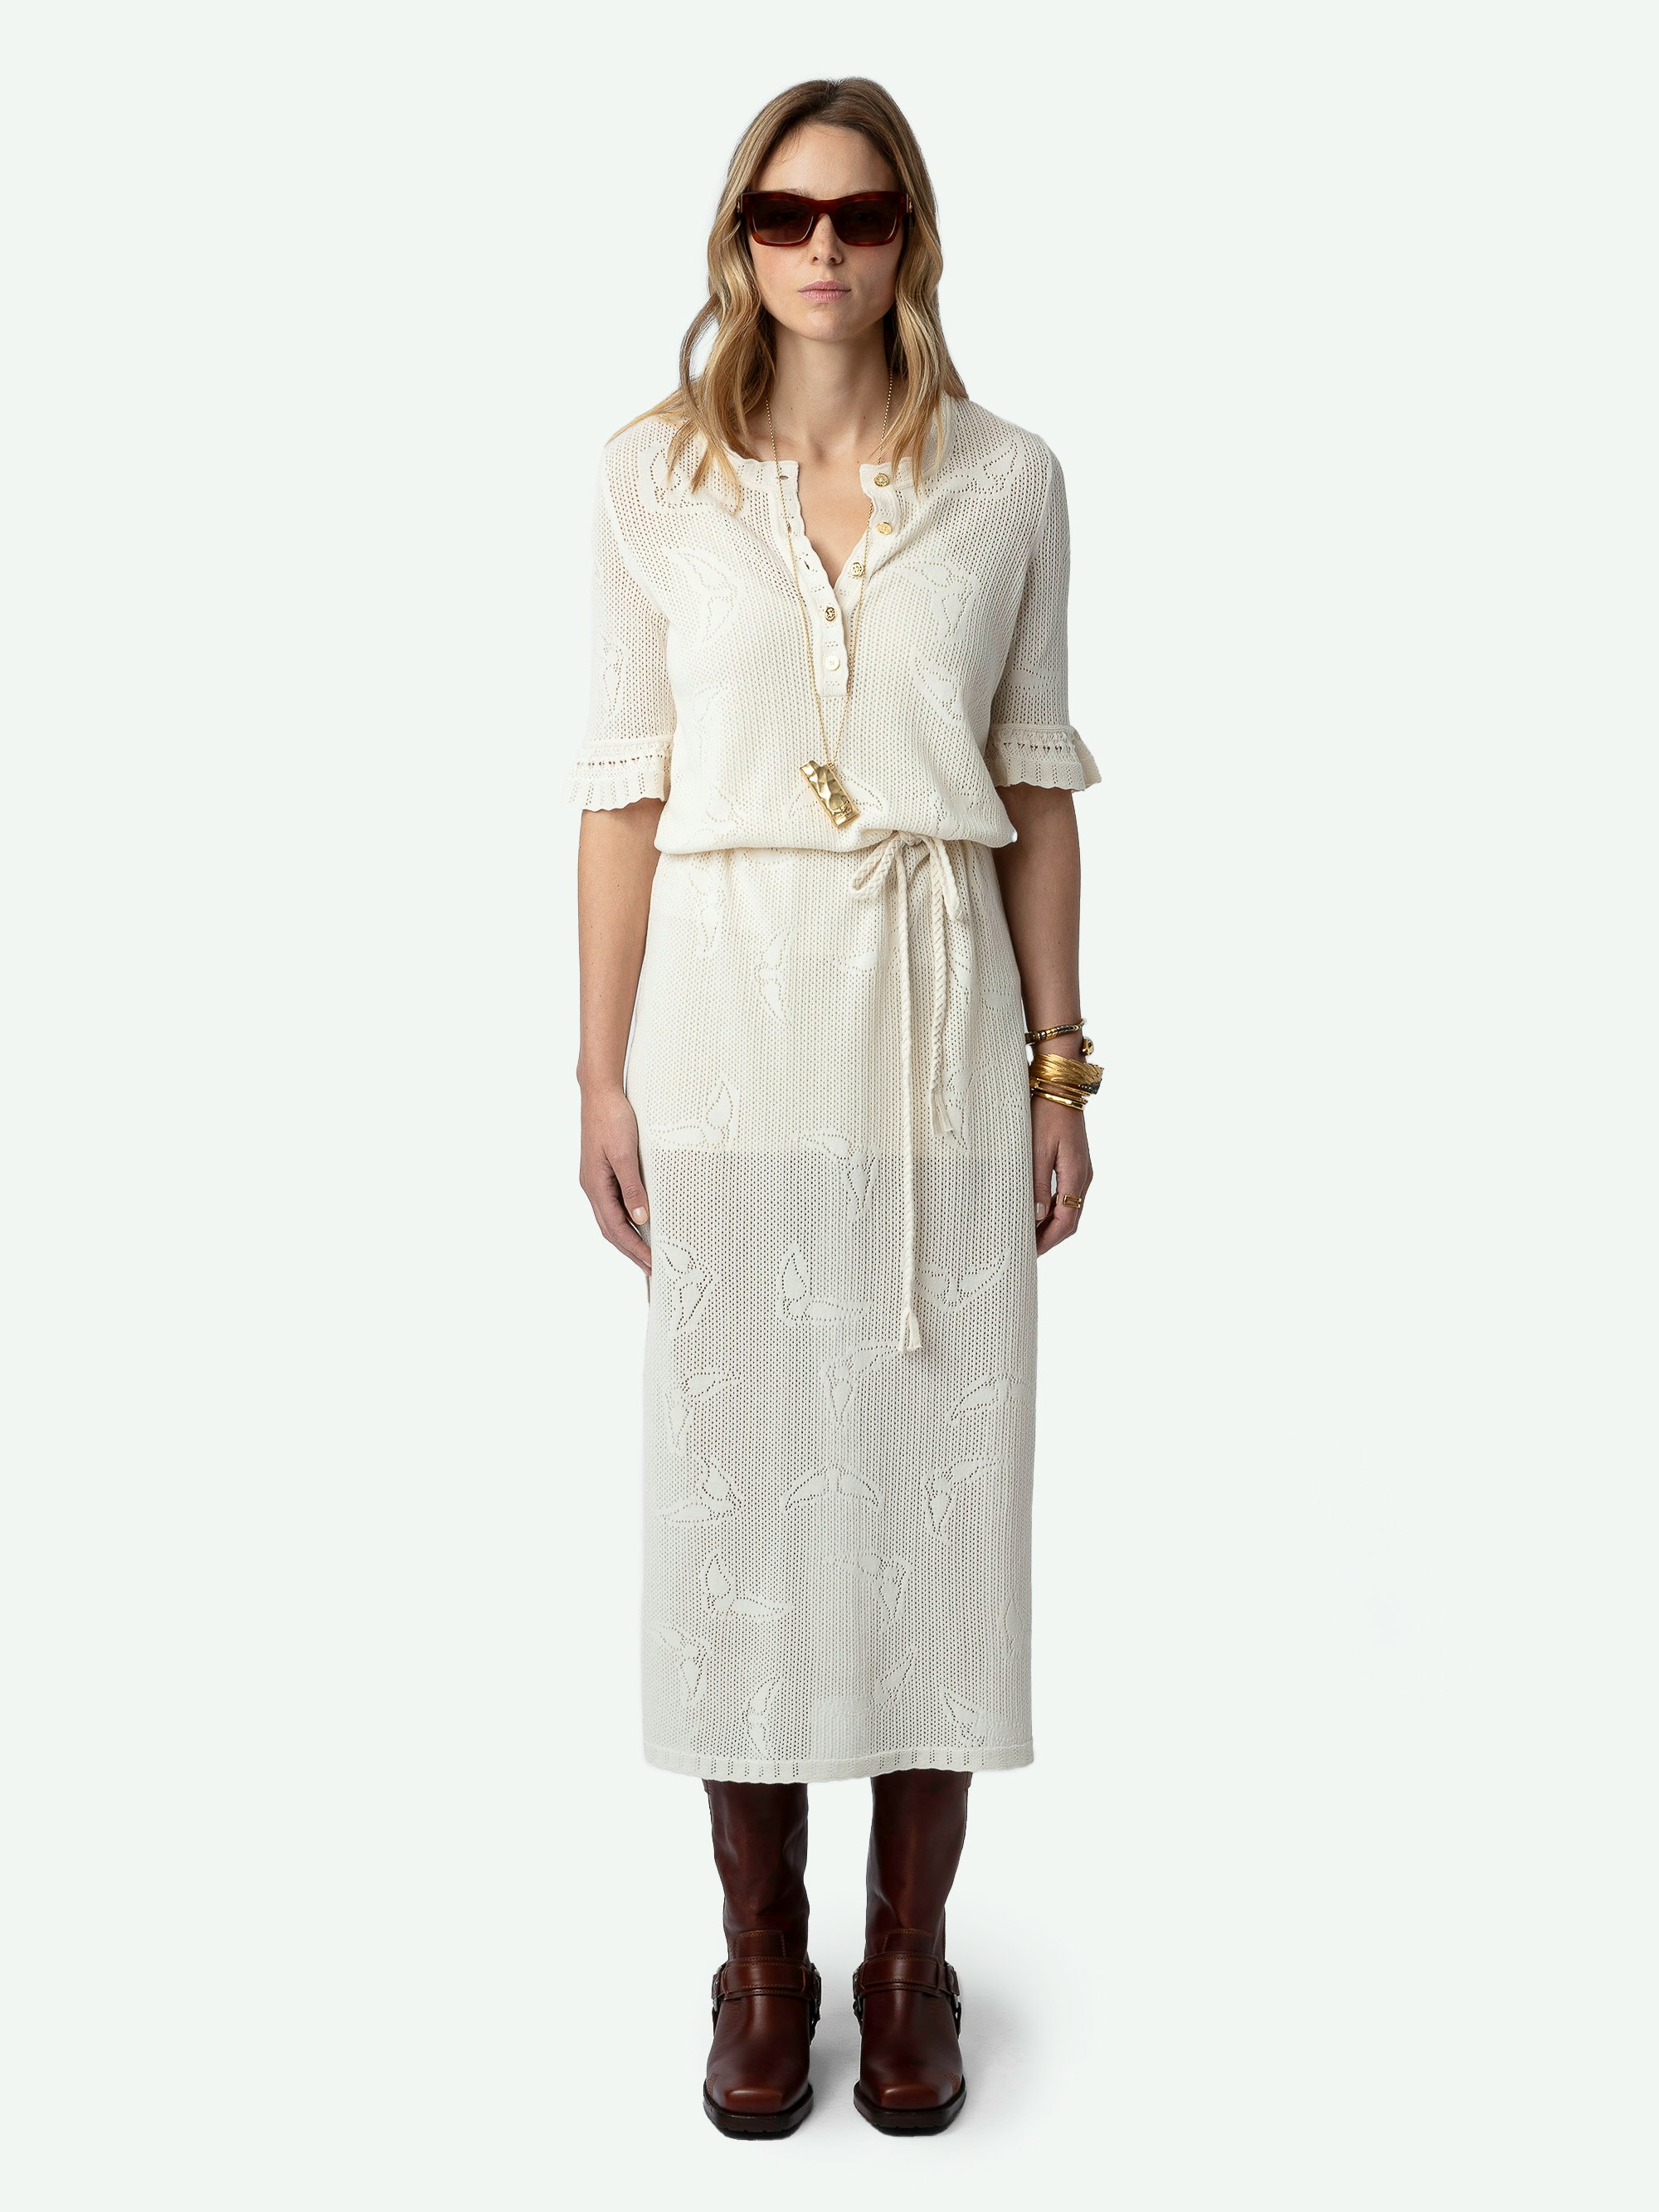 Salmy Wings Dress - Ecru cotton pointelle knit maxi dress with wing motifs, short ruffled sleeves and removable belt.